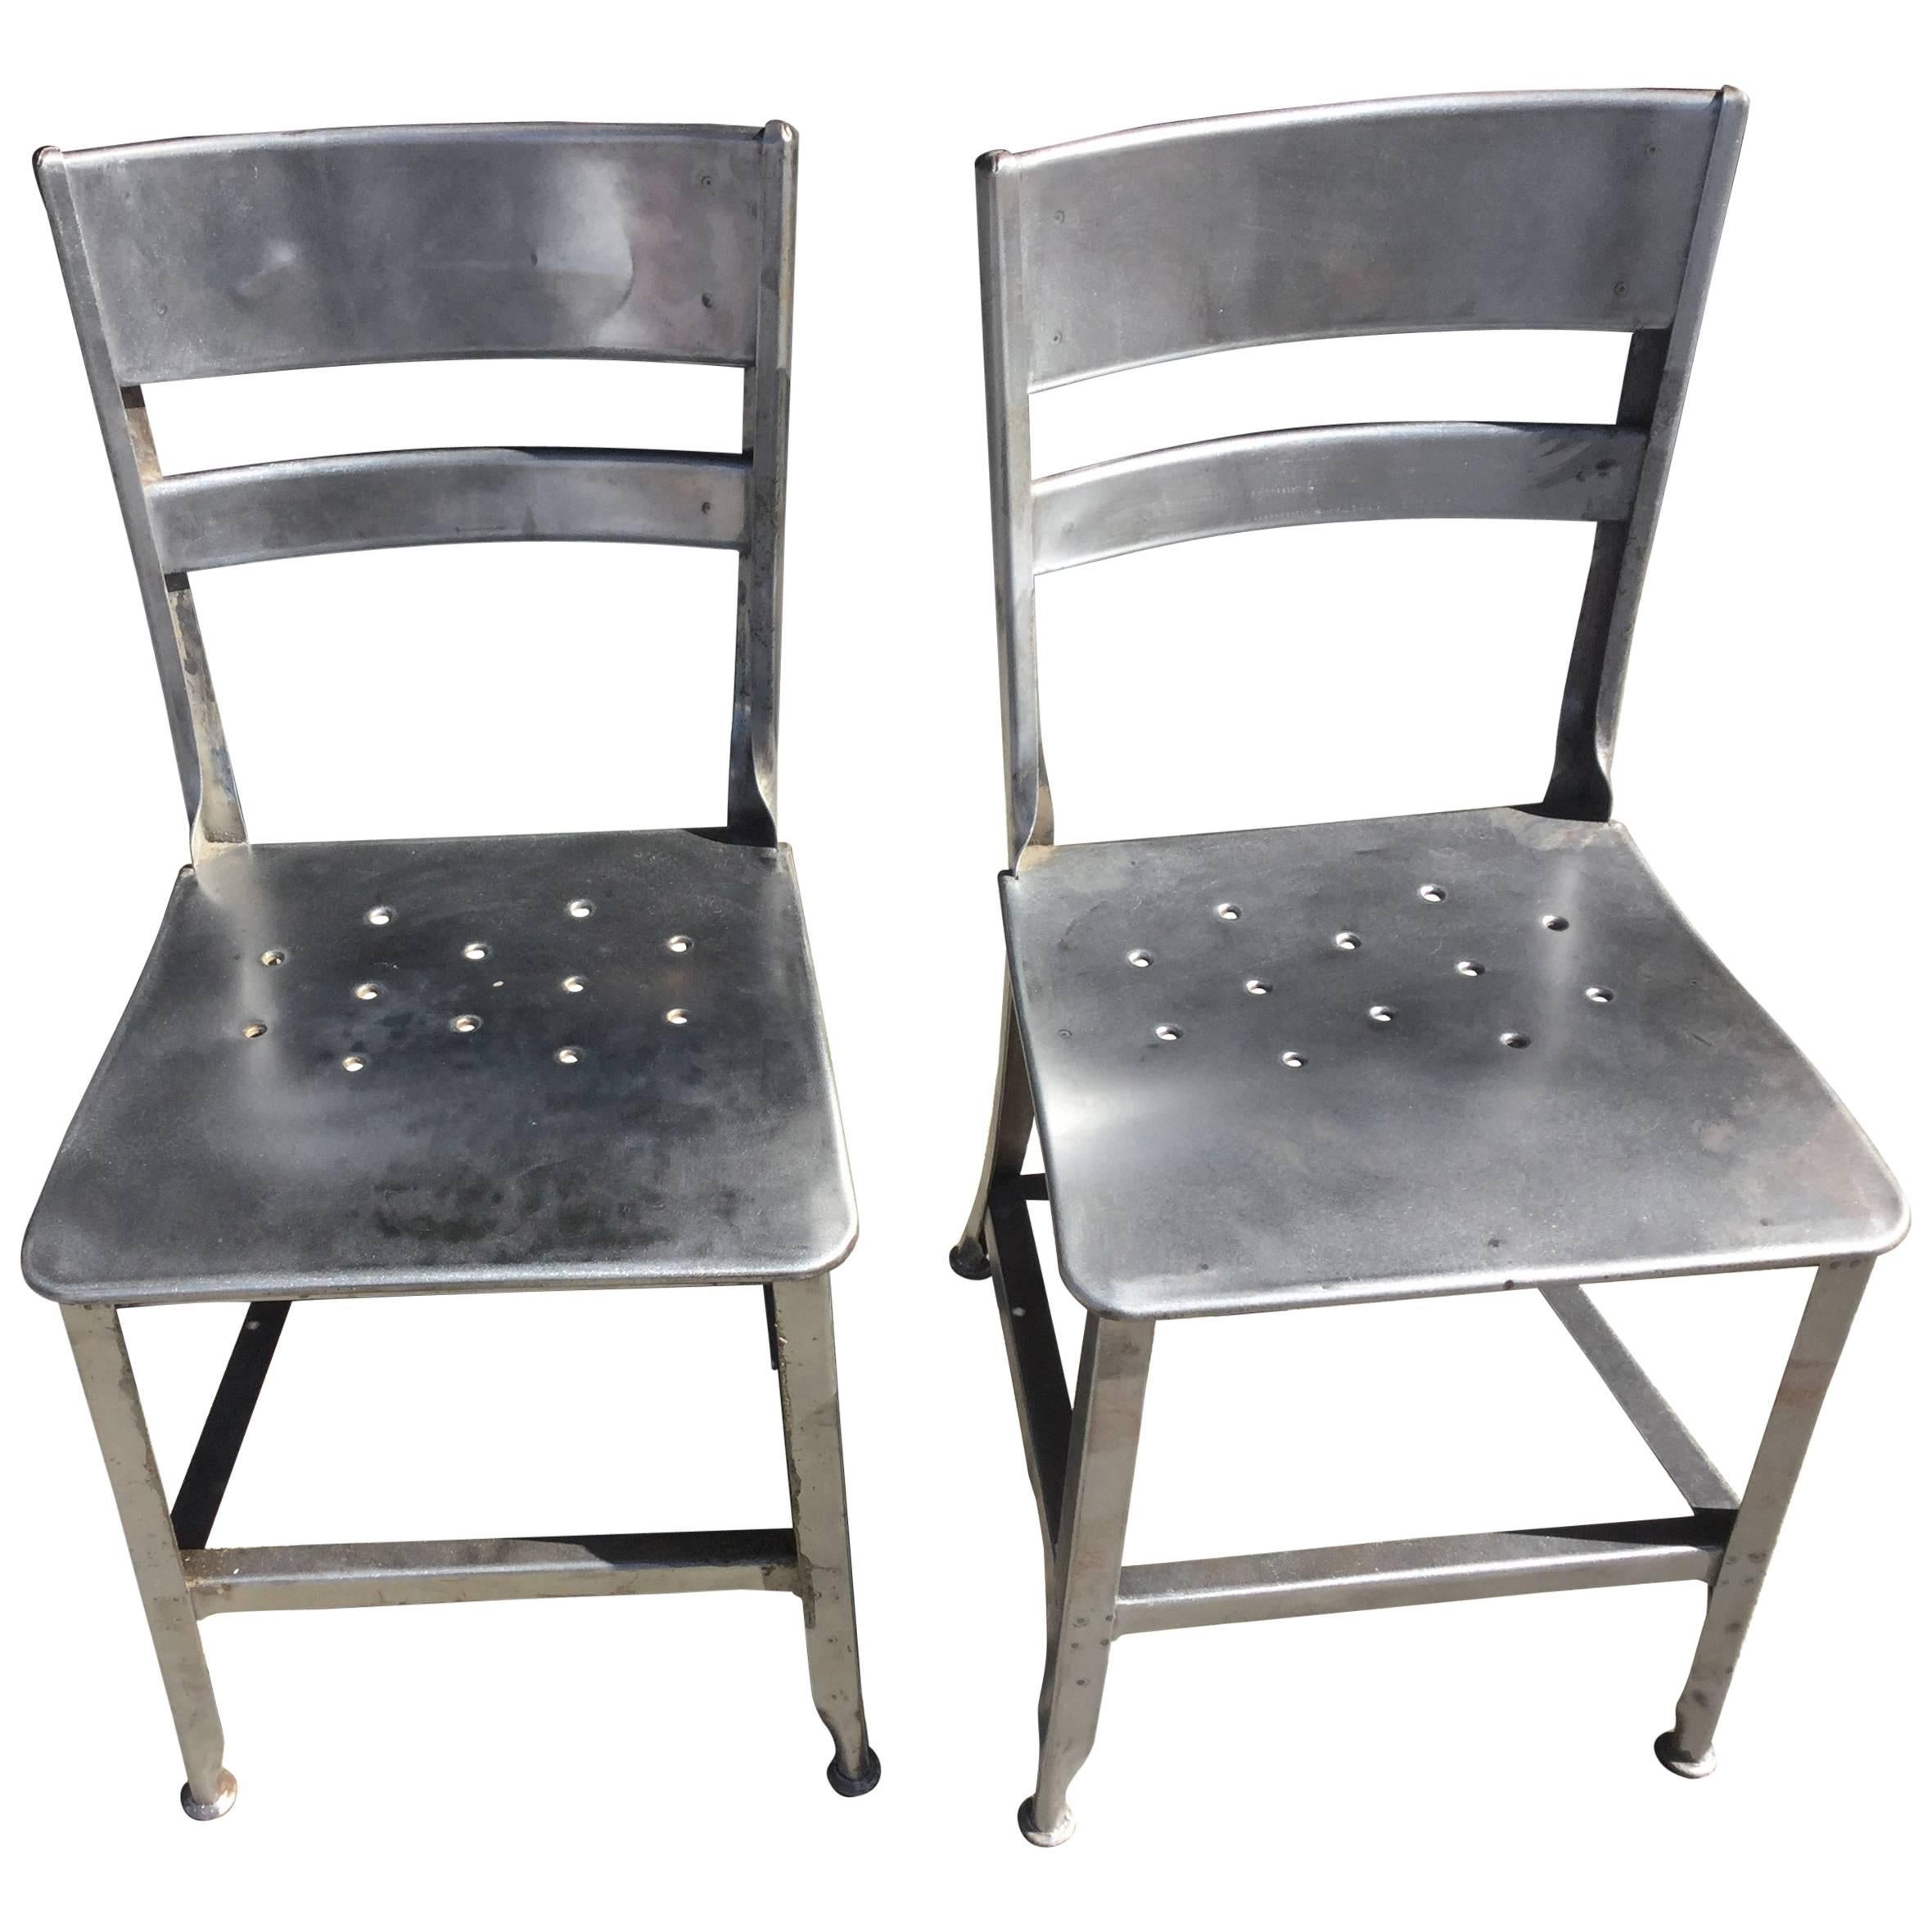 Large Lot Steel Toledo Chairs 4-100 For Sale